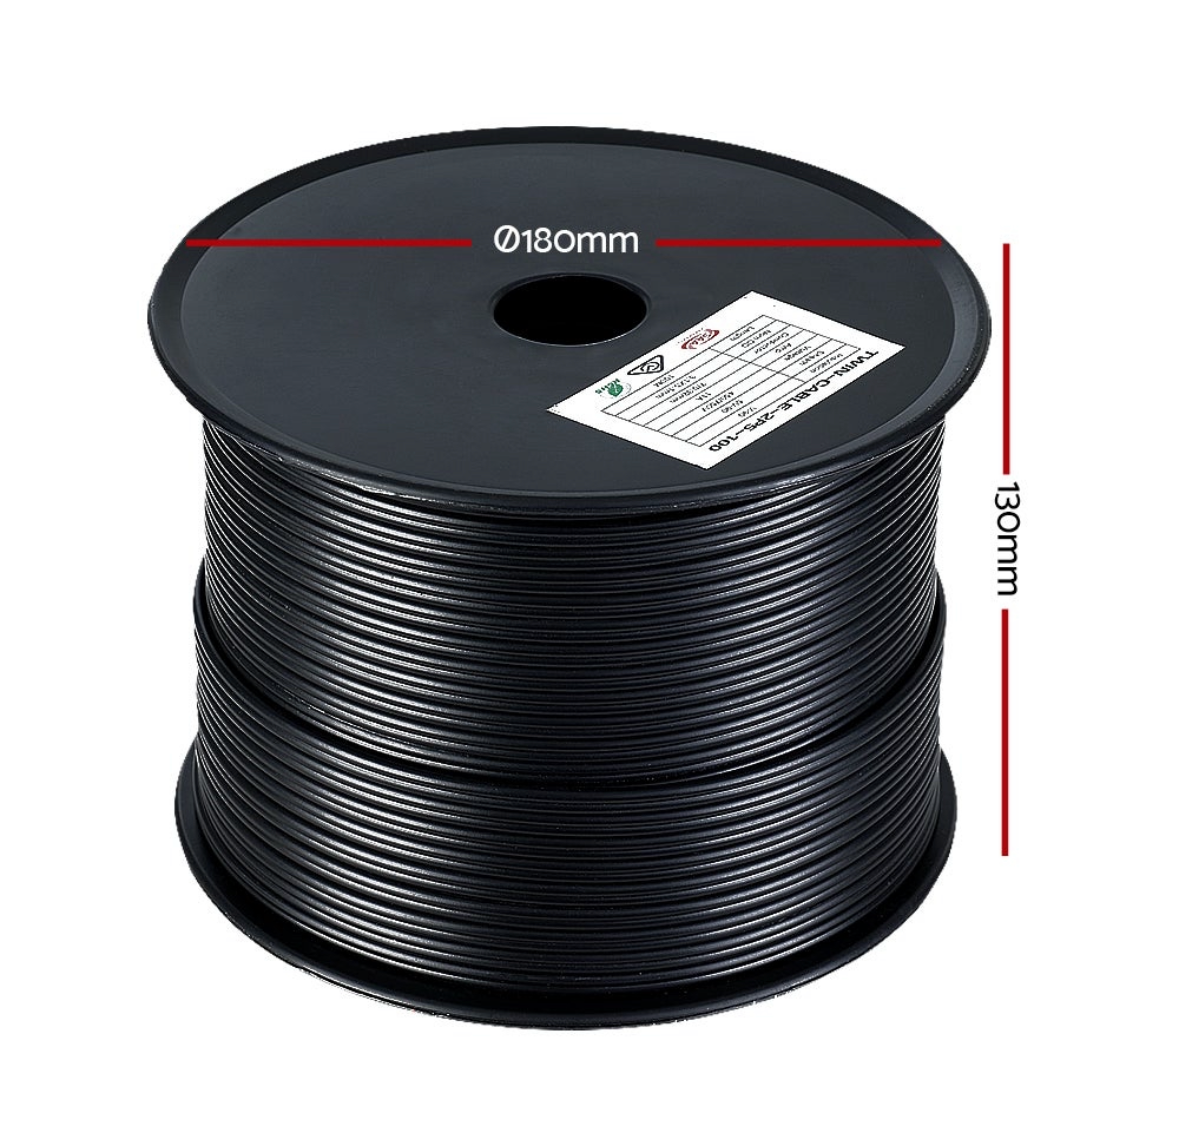 Roll (100m) Dimensions: 180mm across, hight 130mm.  2.5mm * 100m Twin Core Twin Sheath electrical Cable, Red wire positive, Black wire negative. Australian Standards: SAA-certified. Conductor: Oxygen free plain copper wire to AS/NZ 1125. Insulation: V-90 PVC to AS/NZ 3808. Sheath: 5V-90 PVC AS/NZ 3808.  Voltage: up to 450V AC/DC. AMP: 11A Core No.: 2. Strand Diameter: 7/0.32mm.